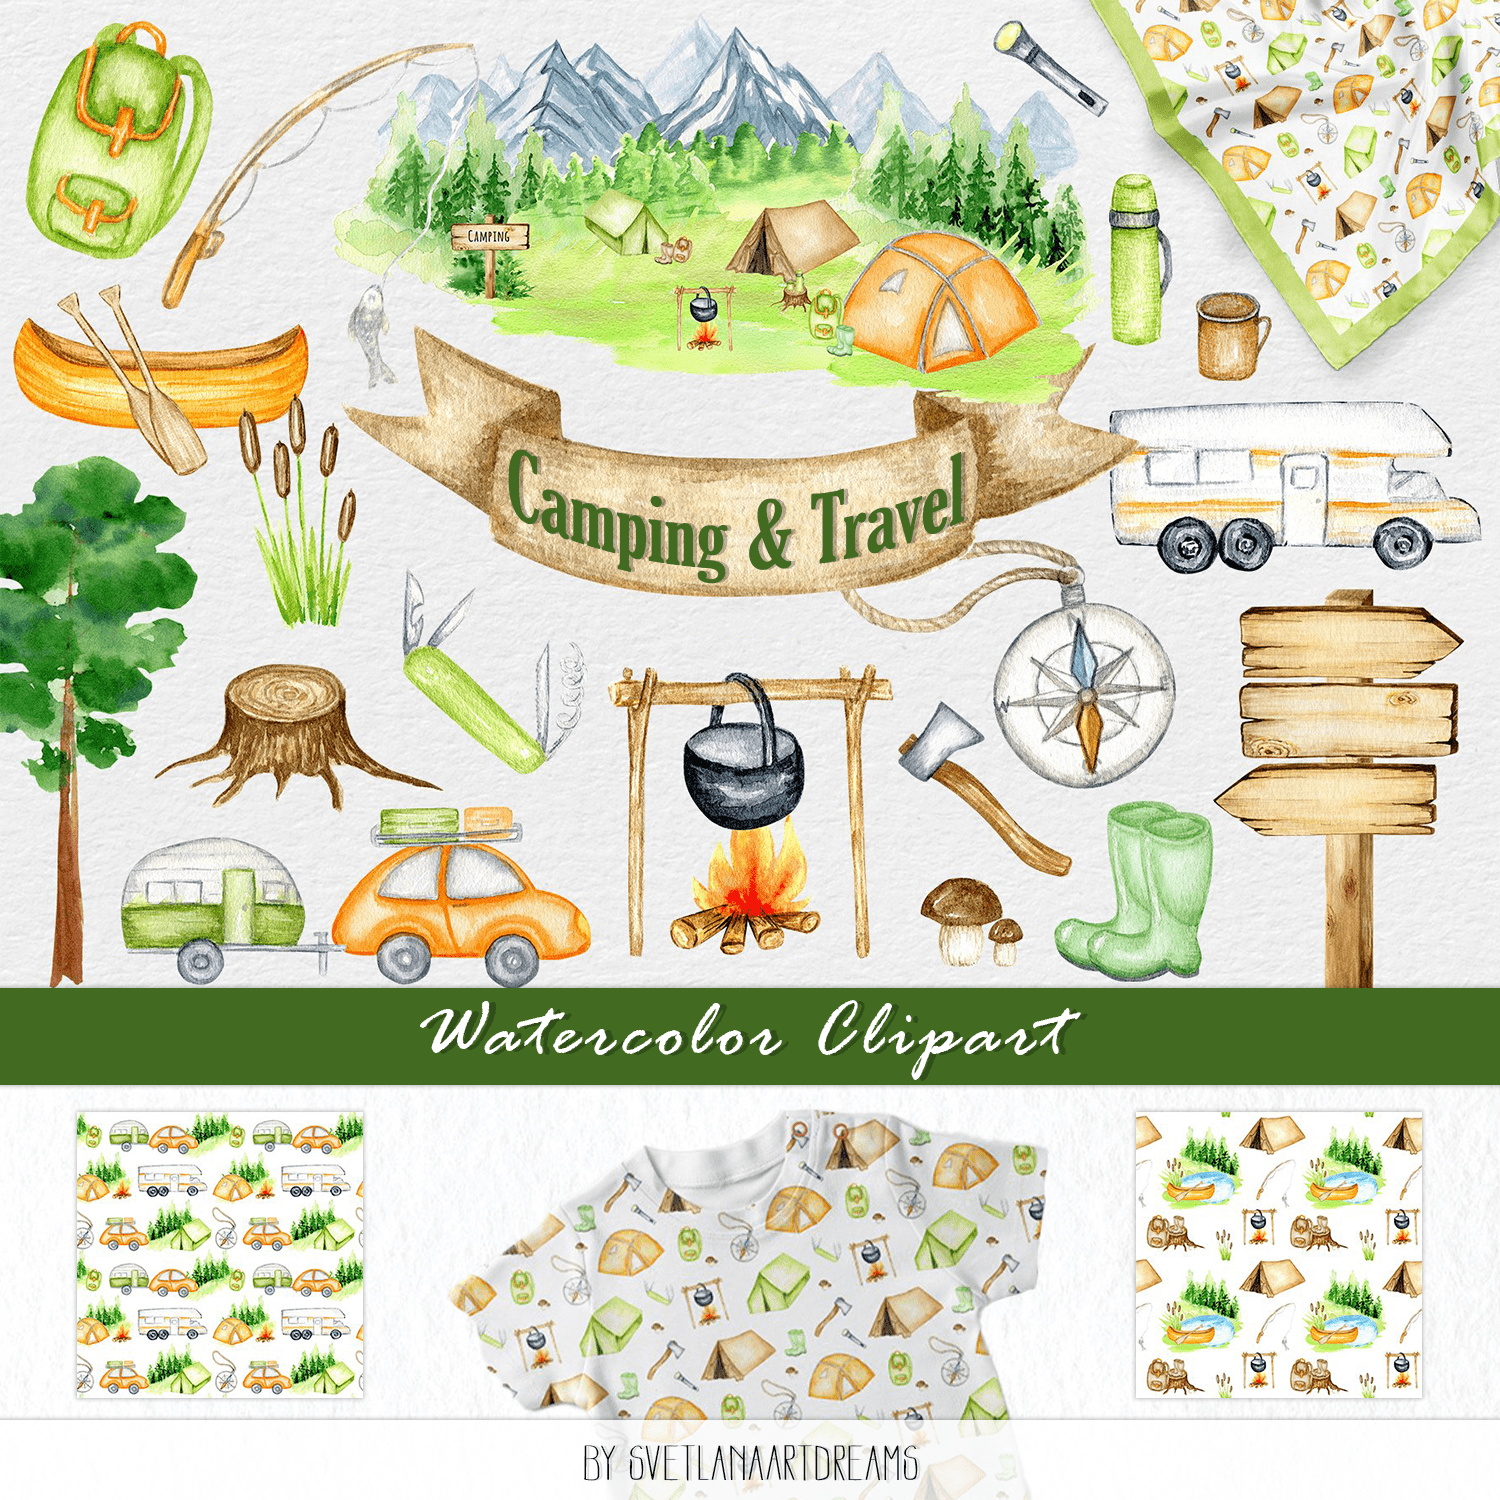 Camping & Travel Watercolor Clipart cover.